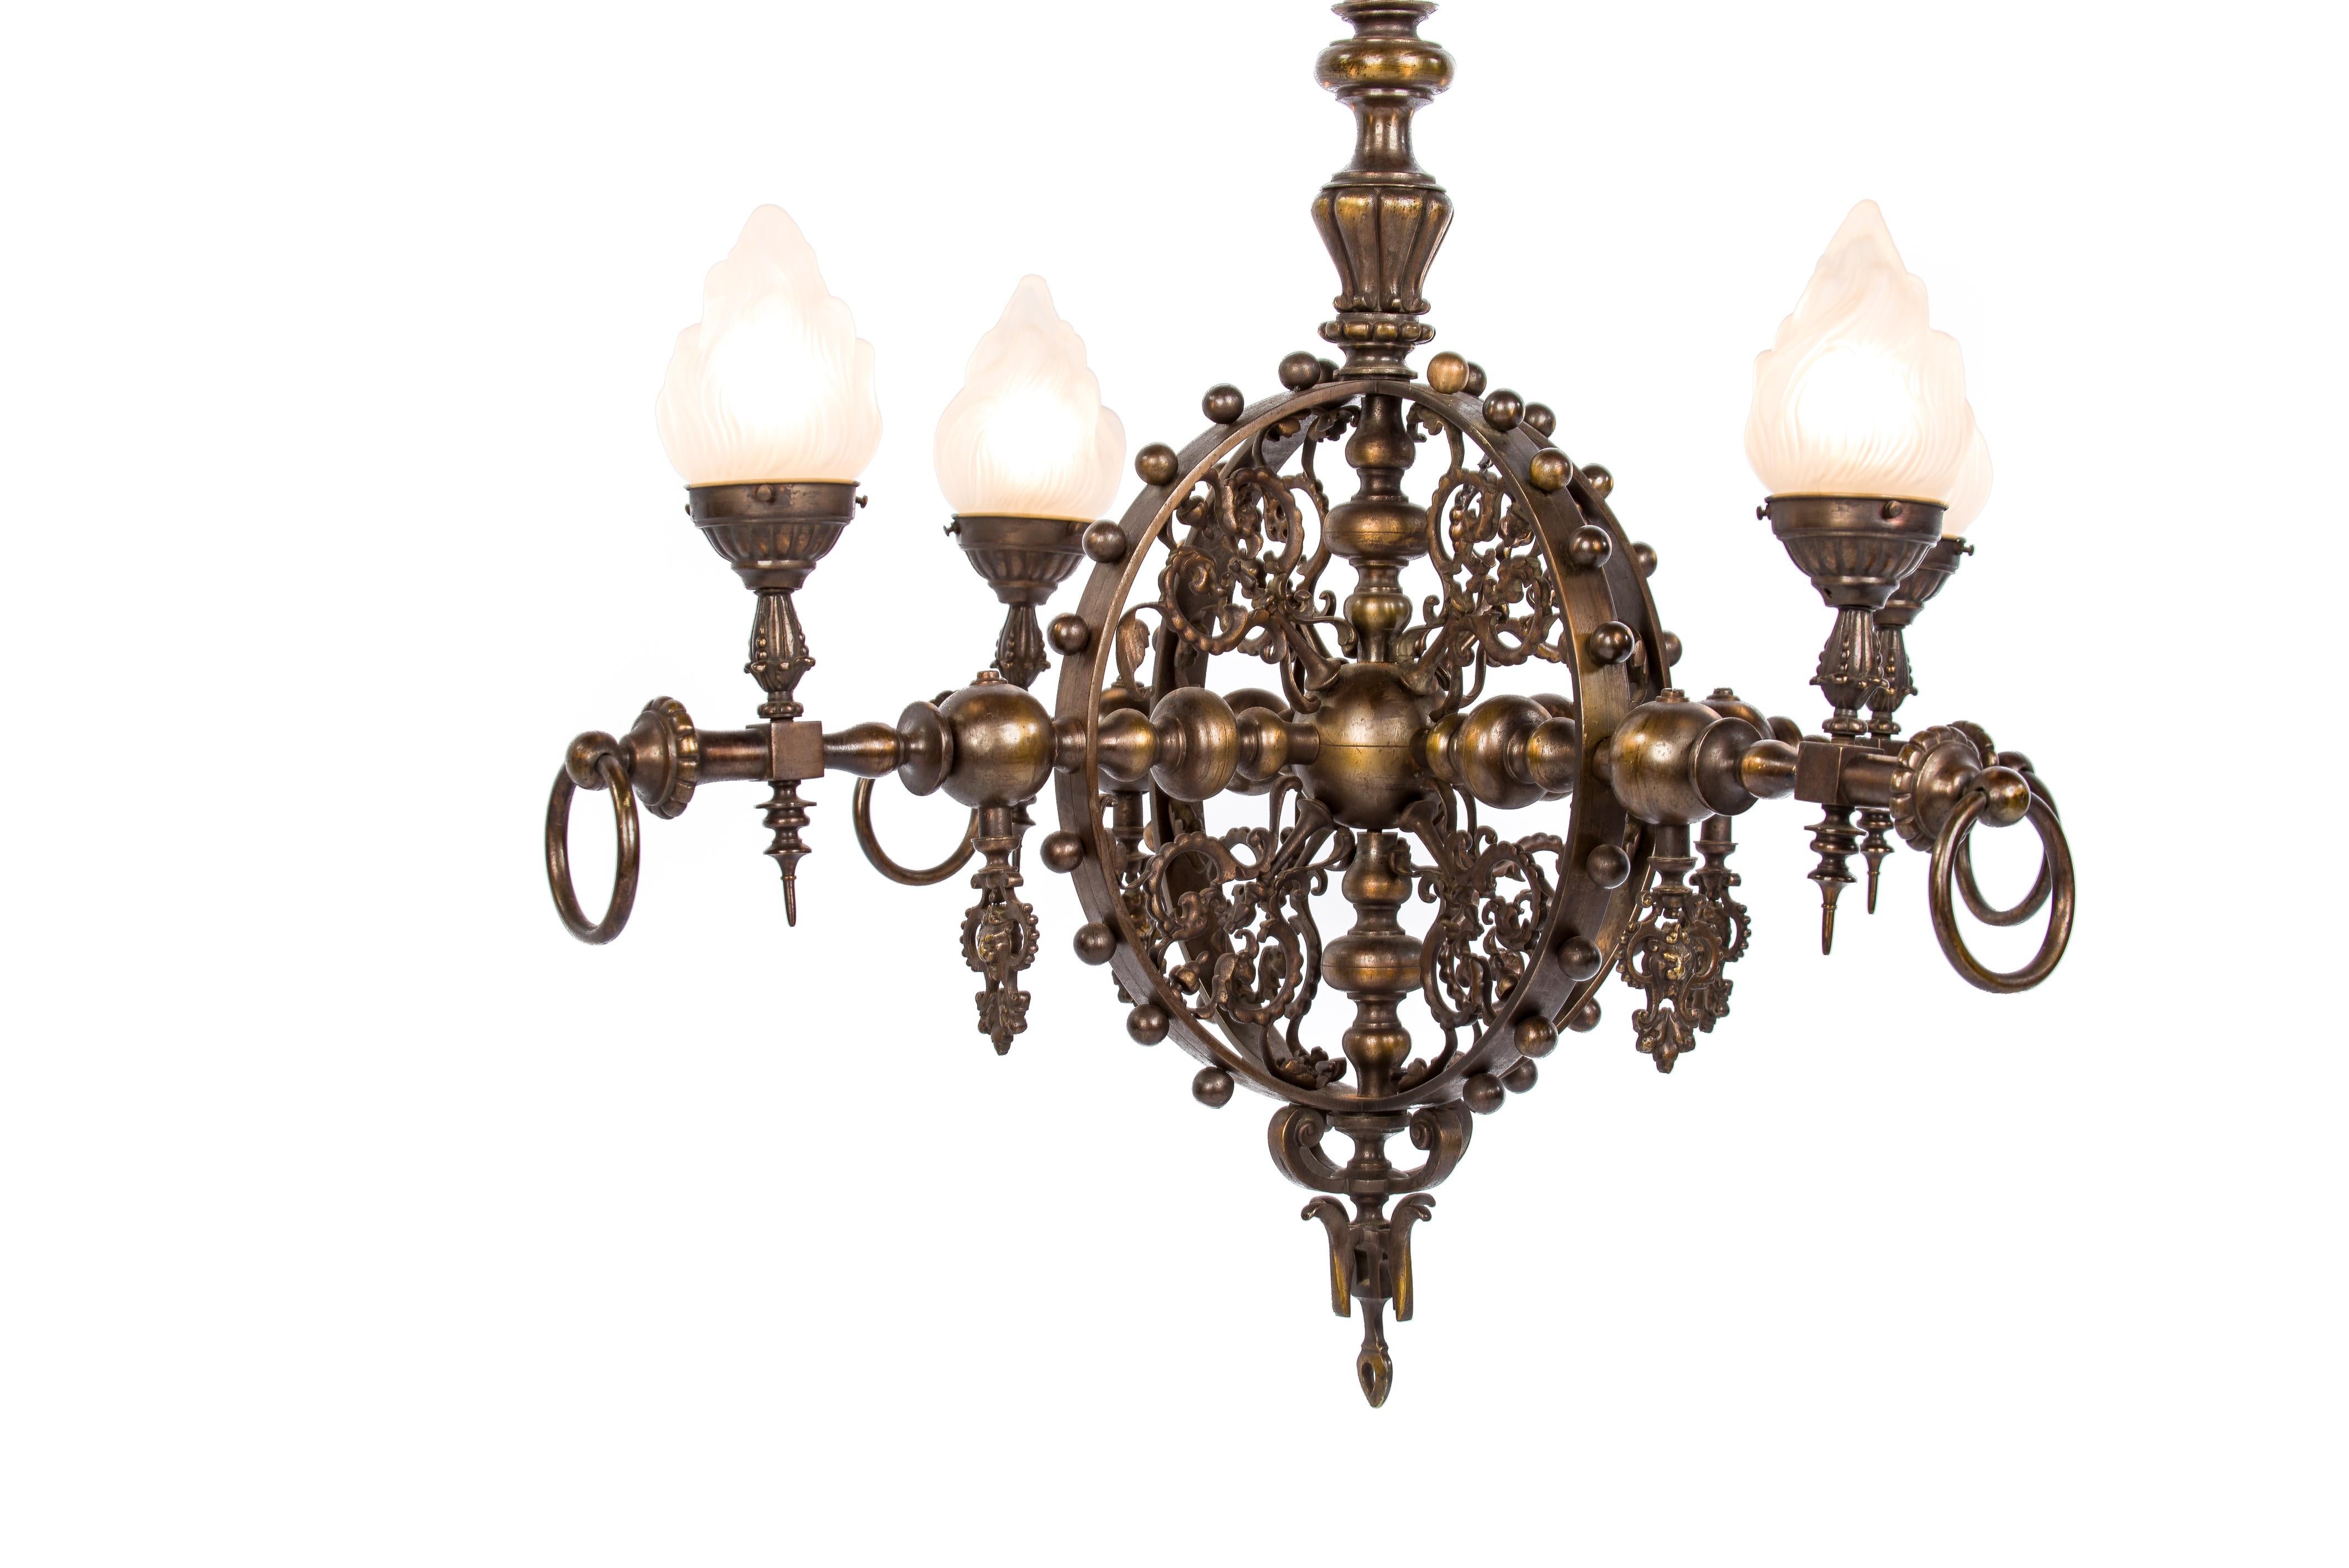 This unique chandelier was made in France in the Provence of Brittany in the early 20th century around 1910. It is completely made of patinated bronze and it was made for gaslighting. 
The chandelier has a circular design typical for the Brittany